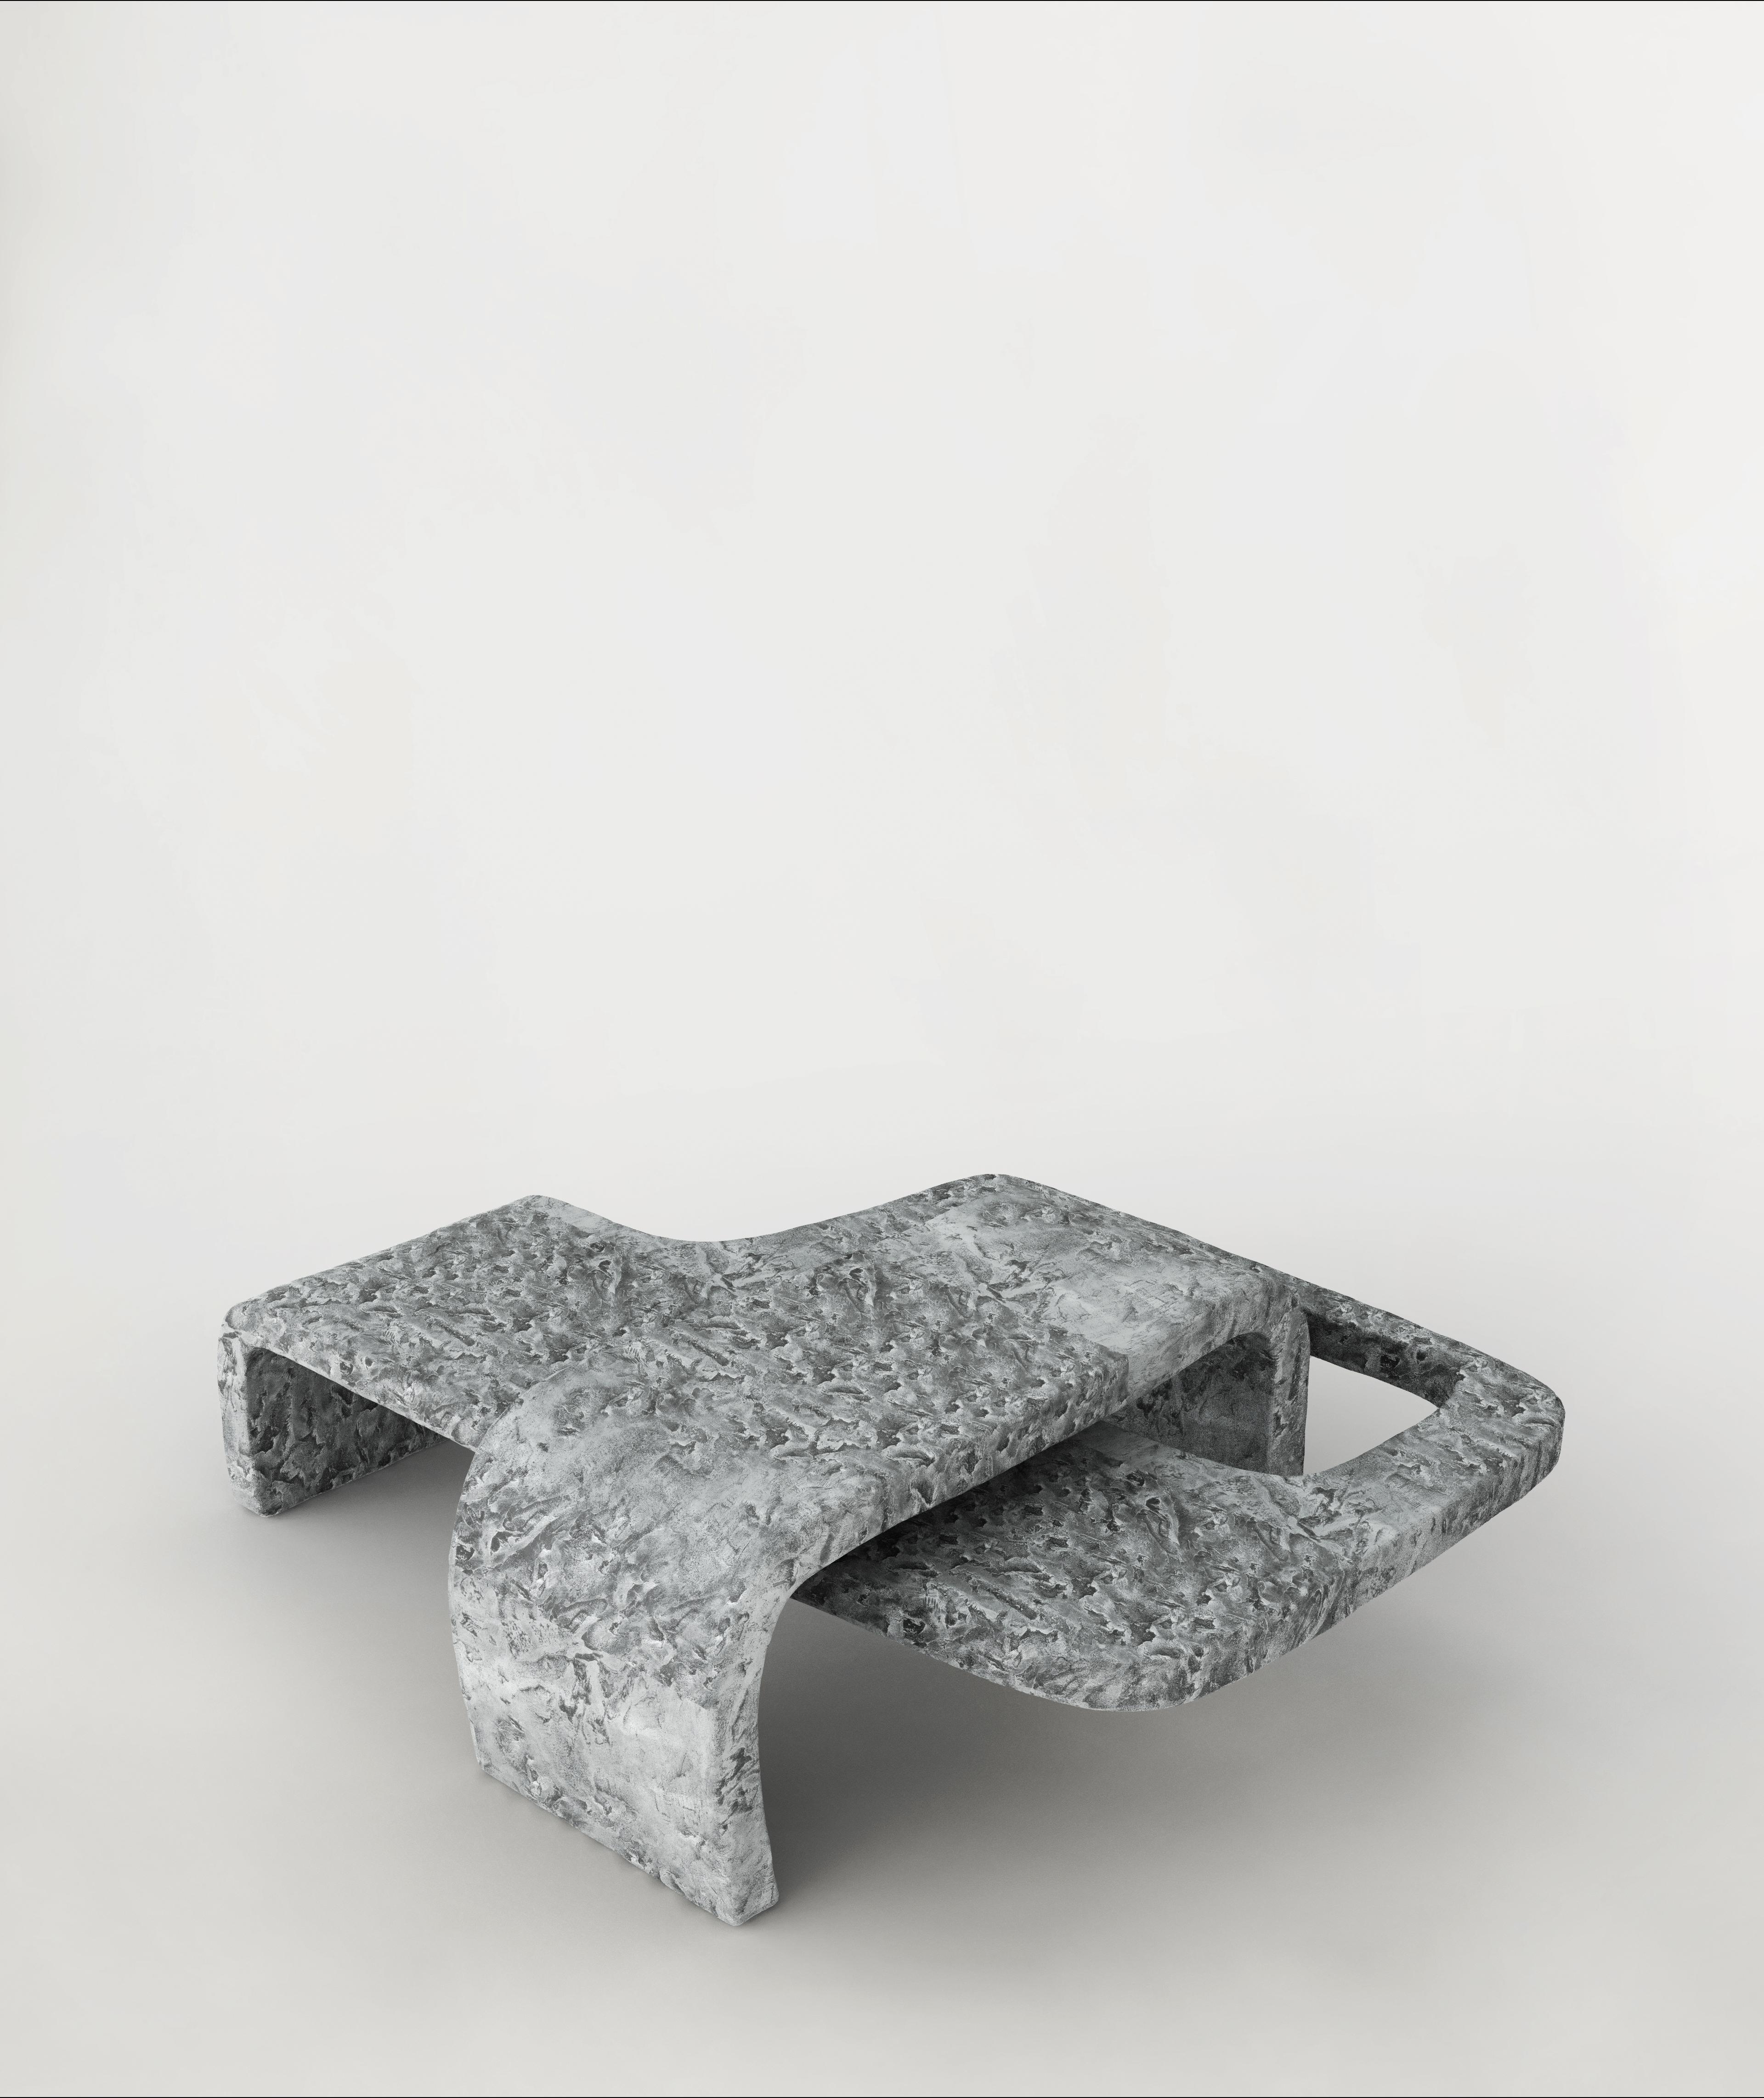 Vertigo N01 low table by Edizione Limitata
Limited Edition. Signed and numbered.
Designers: Simone Fanciullacci
Dimensions: H 29 × W 72 × L 92 cm
Materials: Aluminium

Edizione Limitata, that is to say “Limited Edition”, is a brand promoting and